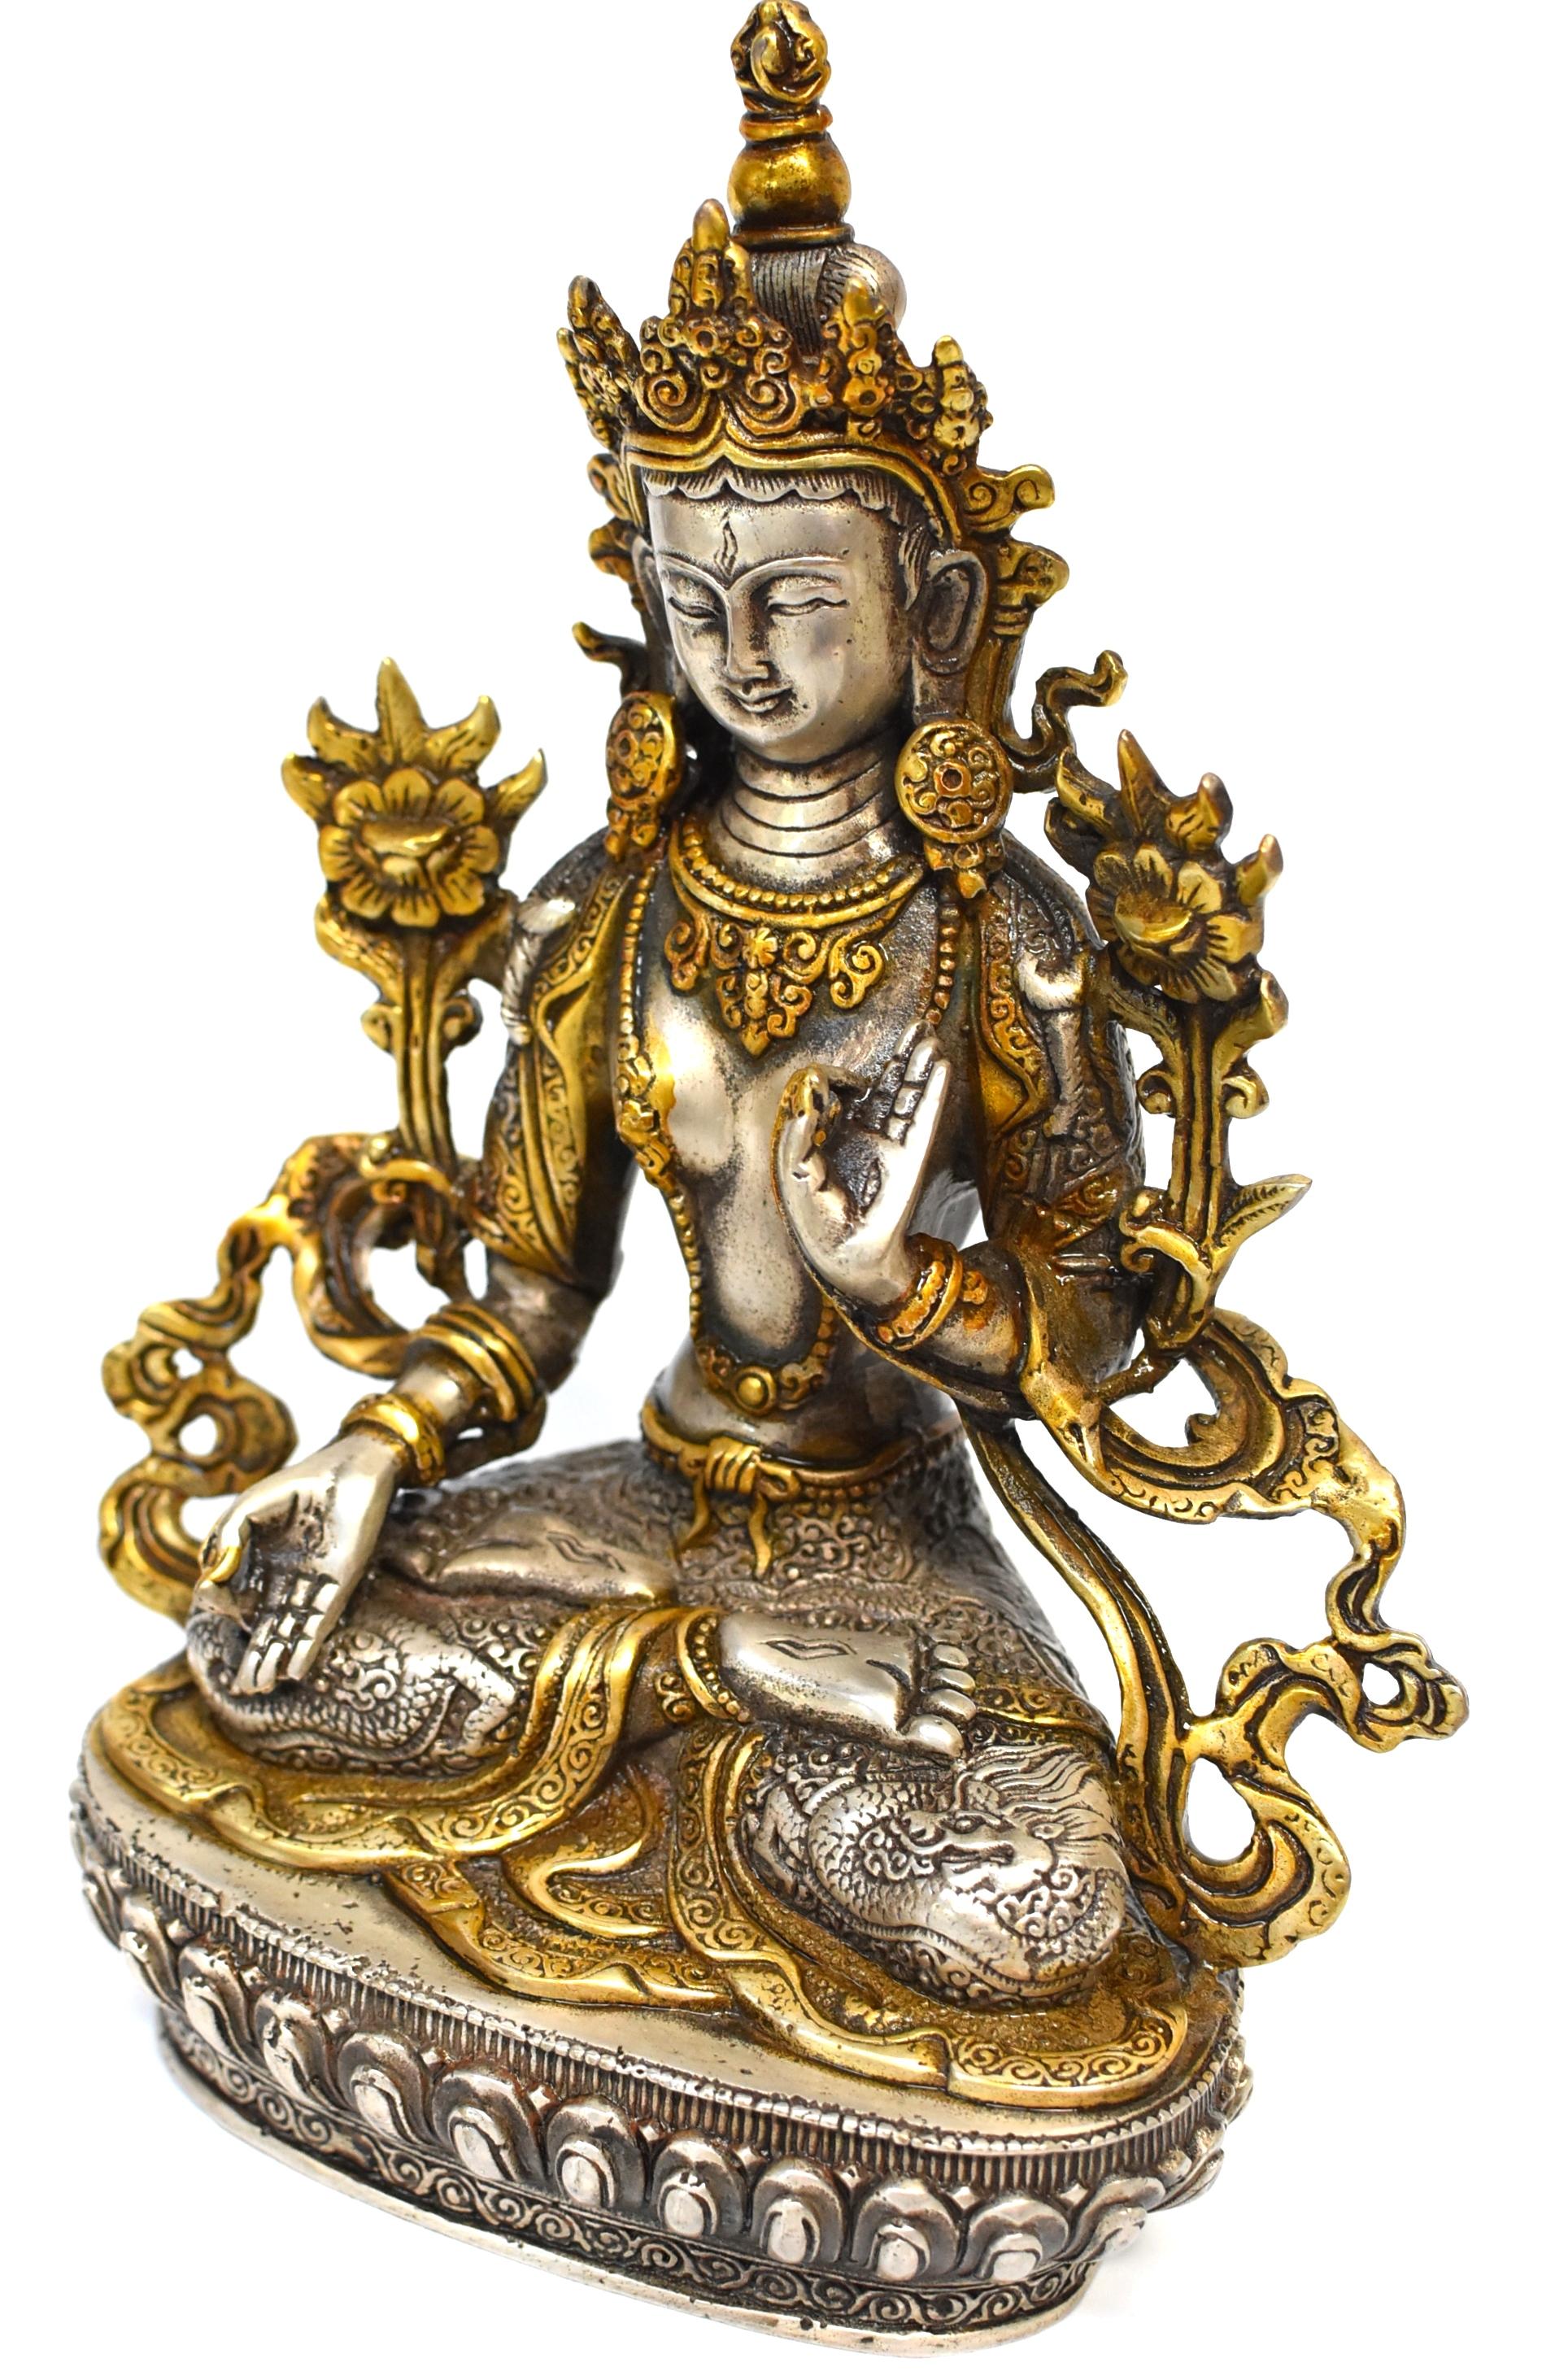 A beautiful statue of Tibetan Bodhisattva White Tara. The Goddess of Great Compassion, she brings blessings and is quick to answer prayers. In this statue she wears a high crown and embossed skirt demonstrating lions and dragons. A fully embossed